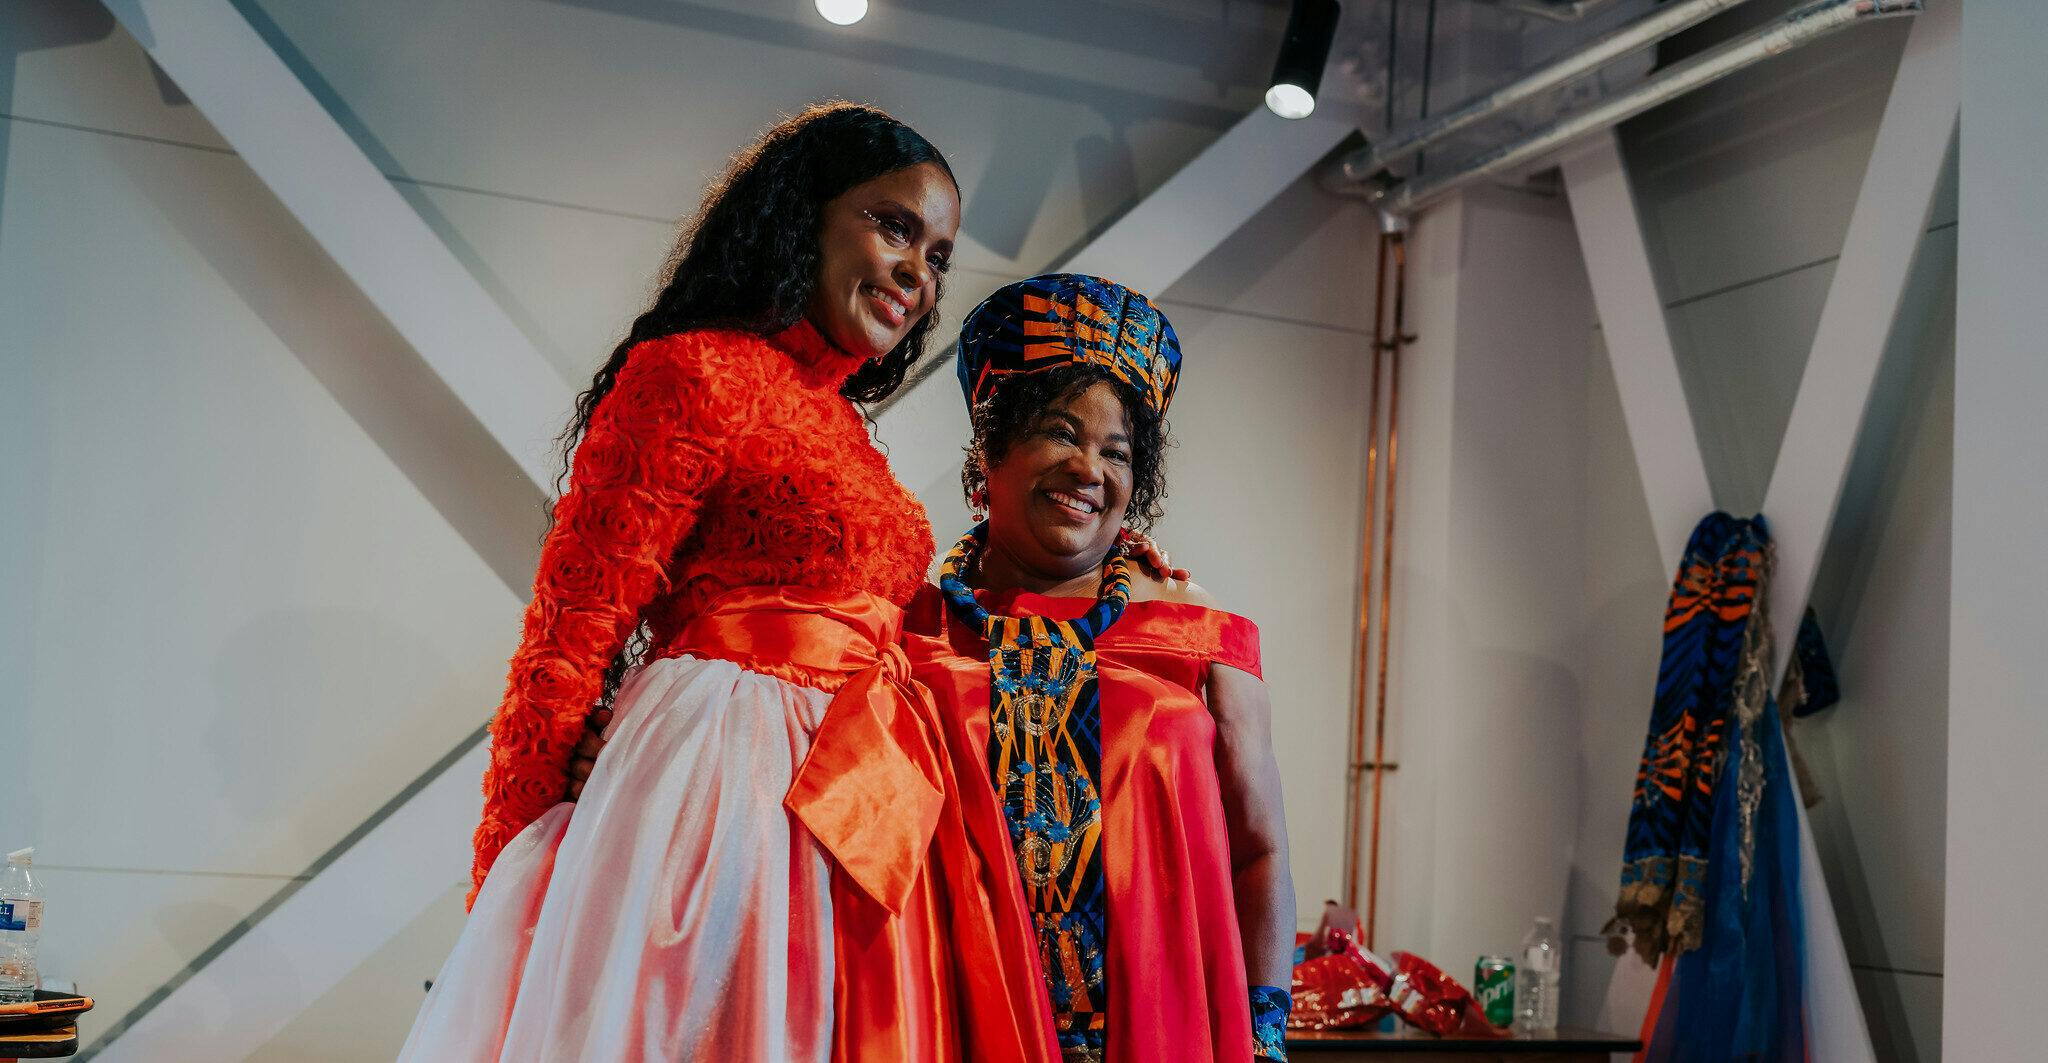 Two women smiling backstage at a fashion show, one of them is wearing a pink red top made up of fabric roses and a pink long skirt with an orange bow around the waist. The next is wearing a blue & orange hat and dress inspired by her African heritage.